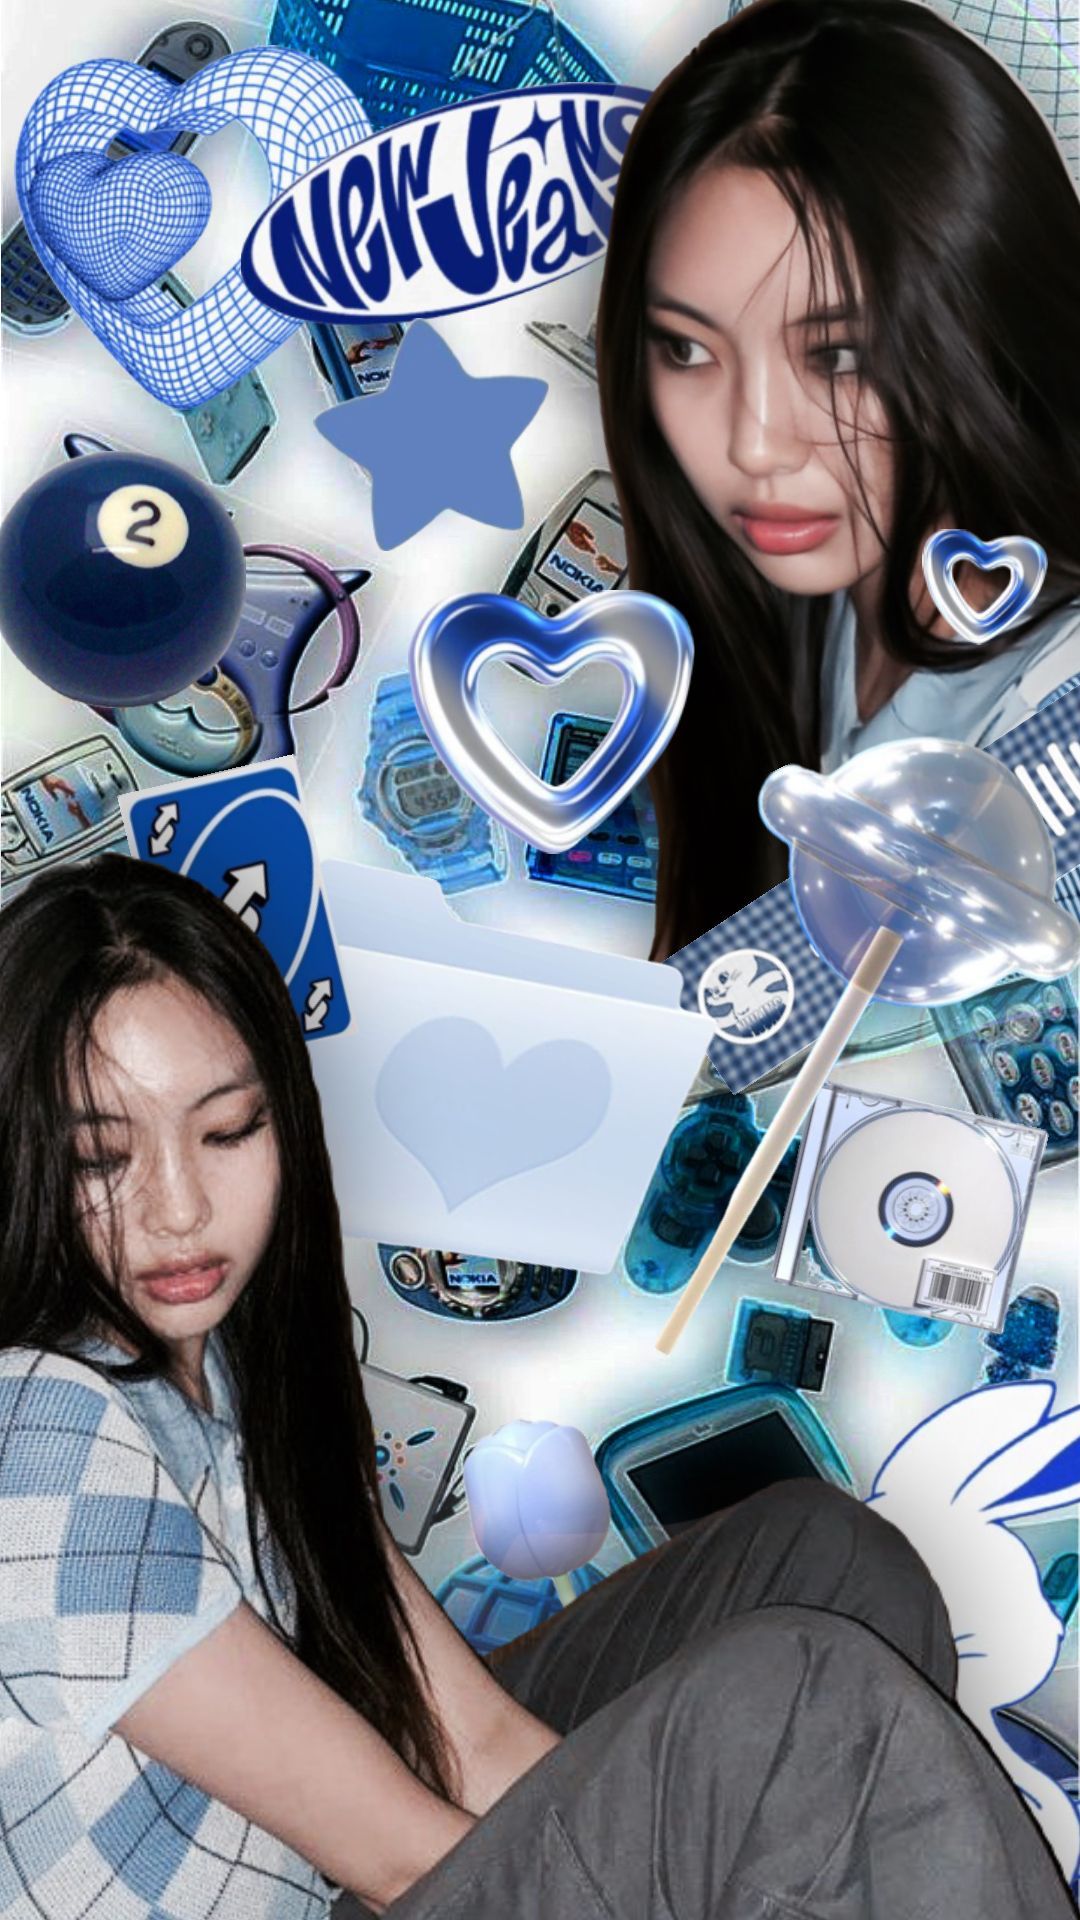 Aesthetic phone background of a girl with black hair and blue hearts - NewJeans